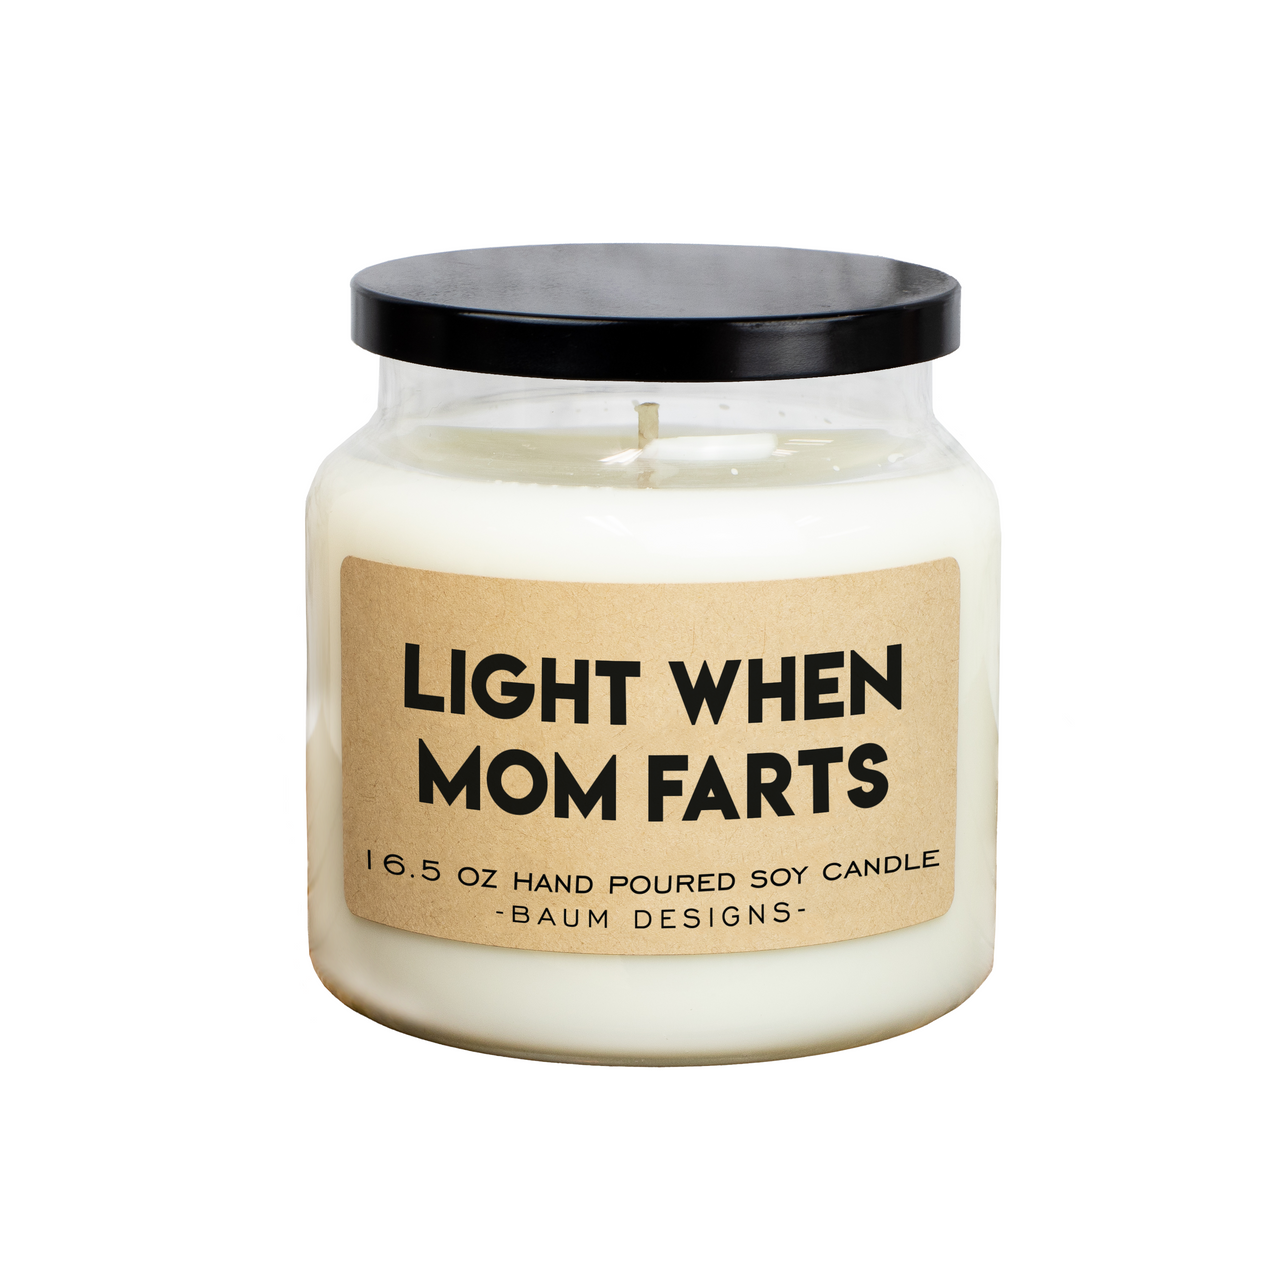 Light When Mom Farts Soy Candle